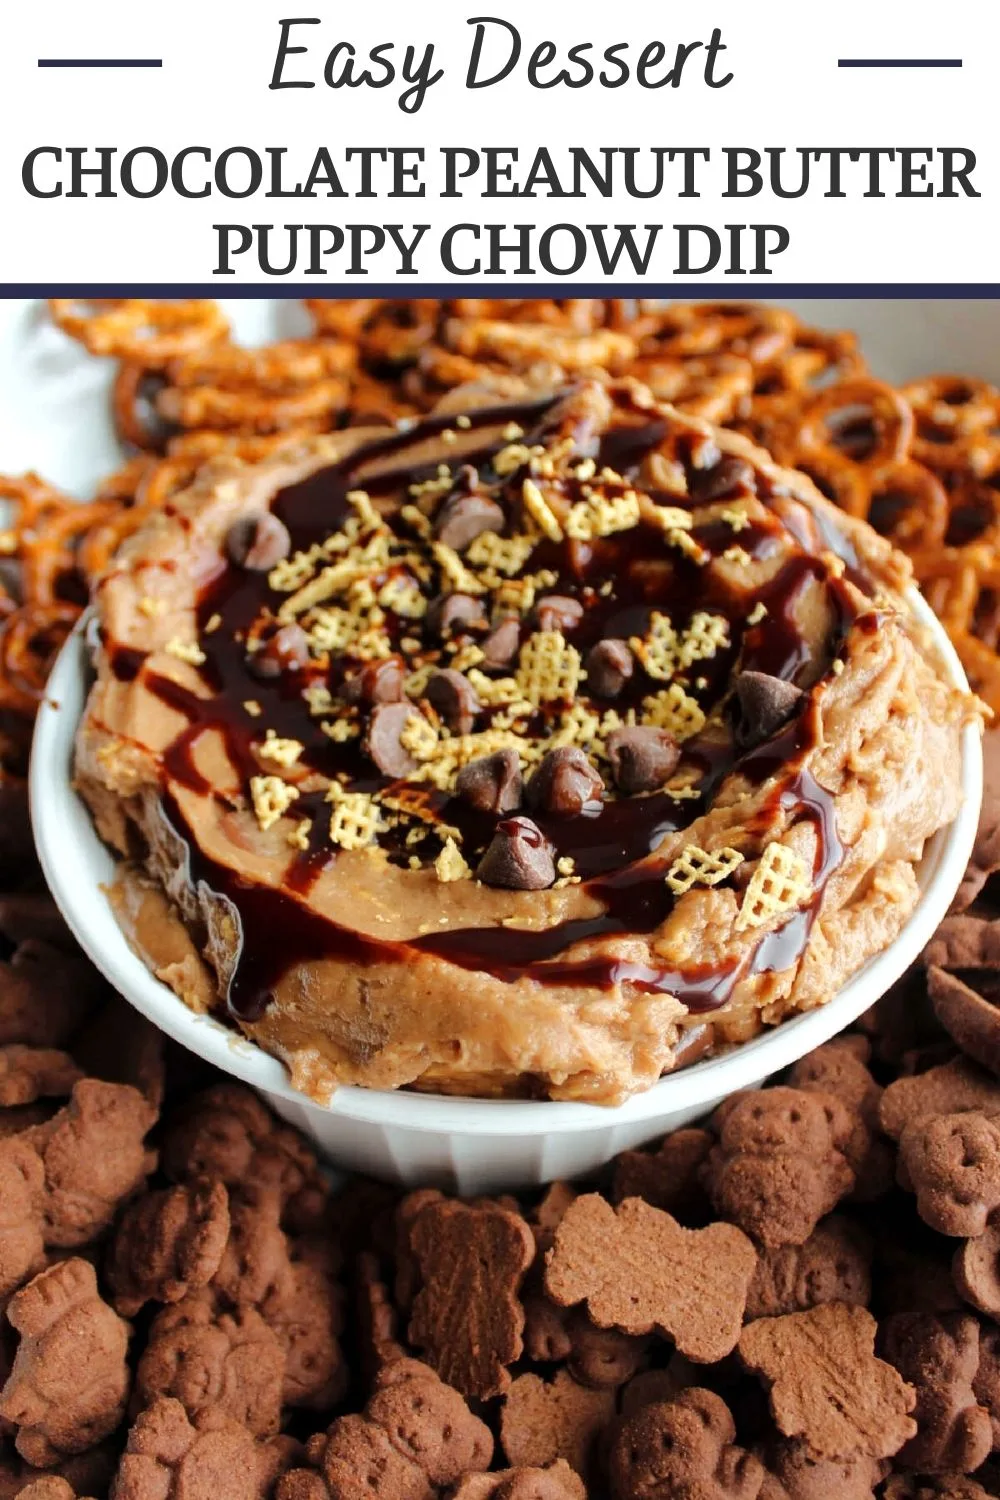 Puppy chow dip has big chocolate and peanut butter flavor with fun bits of Chex to remind us of our favorite snack mix. It is a fun dessert for parties, game day and more.